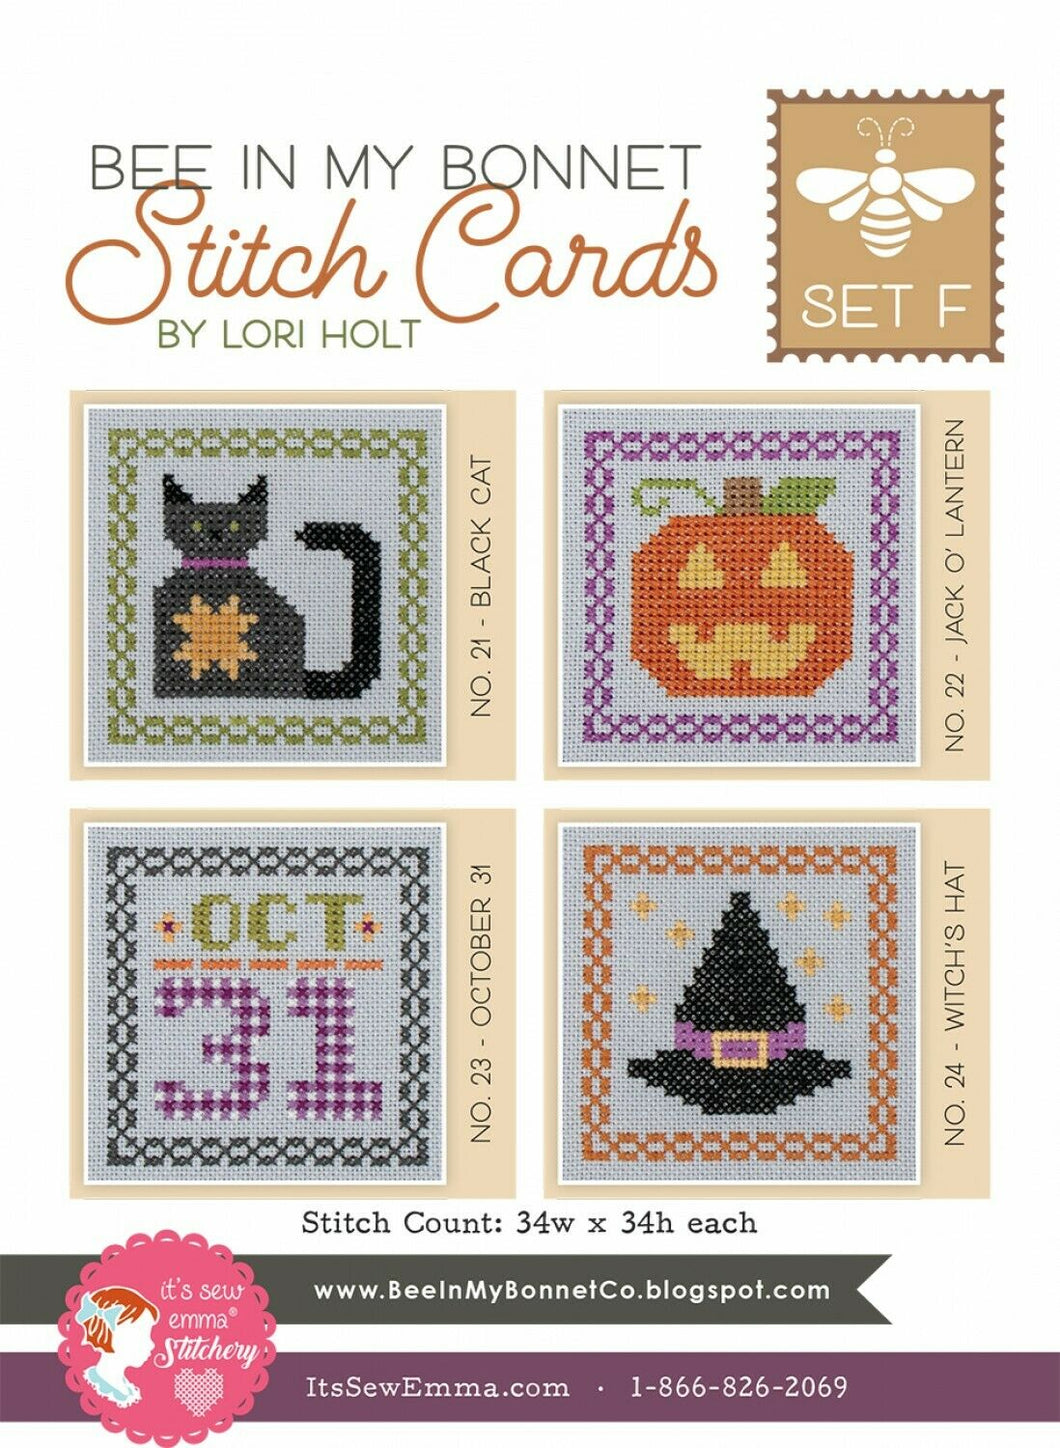 Stitch Cards Set F by Lori Holt Bee in my Bonnet